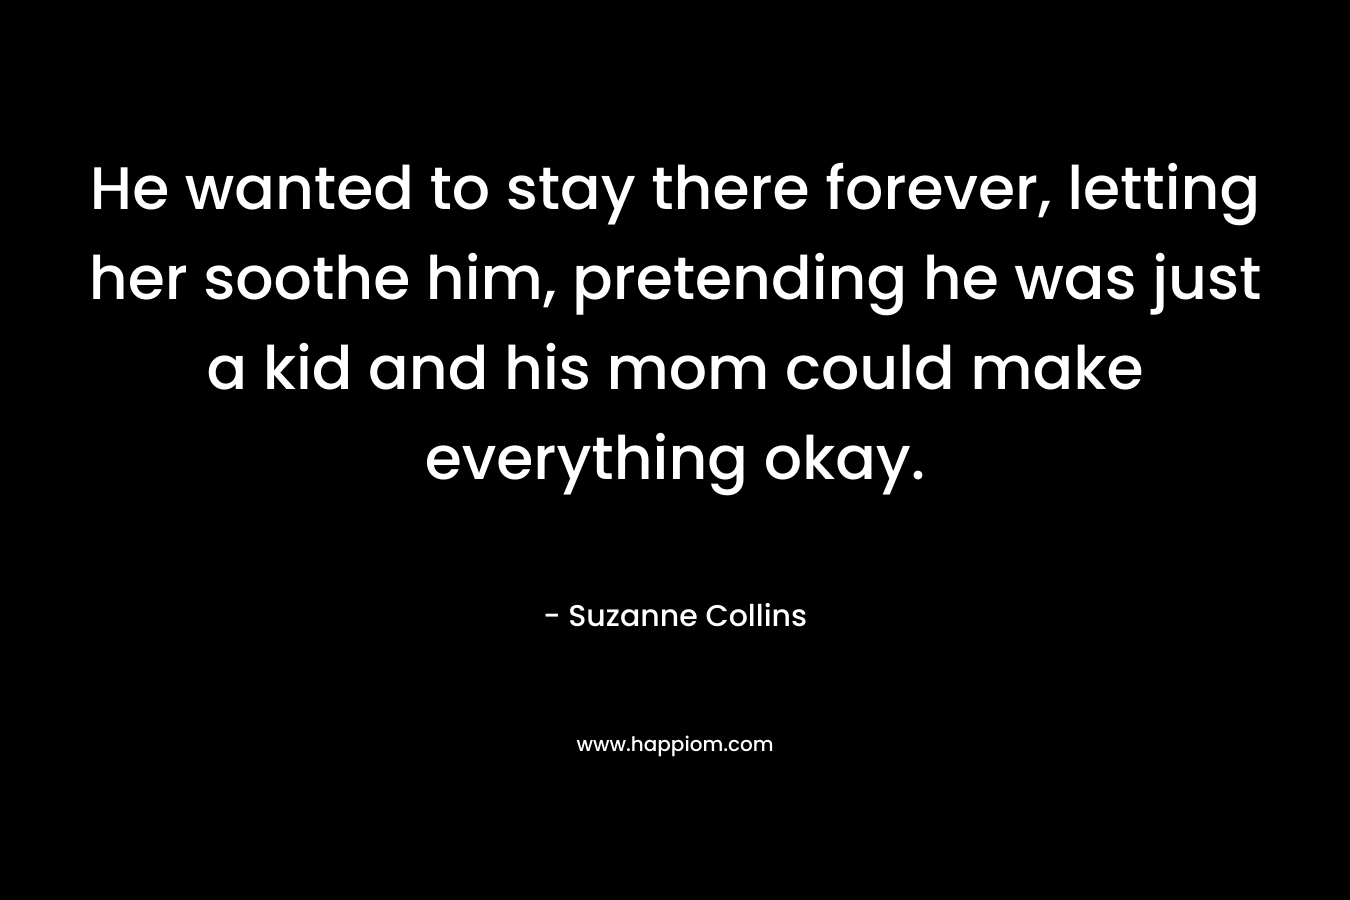 He wanted to stay there forever, letting her soothe him, pretending he was just a kid and his mom could make everything okay.